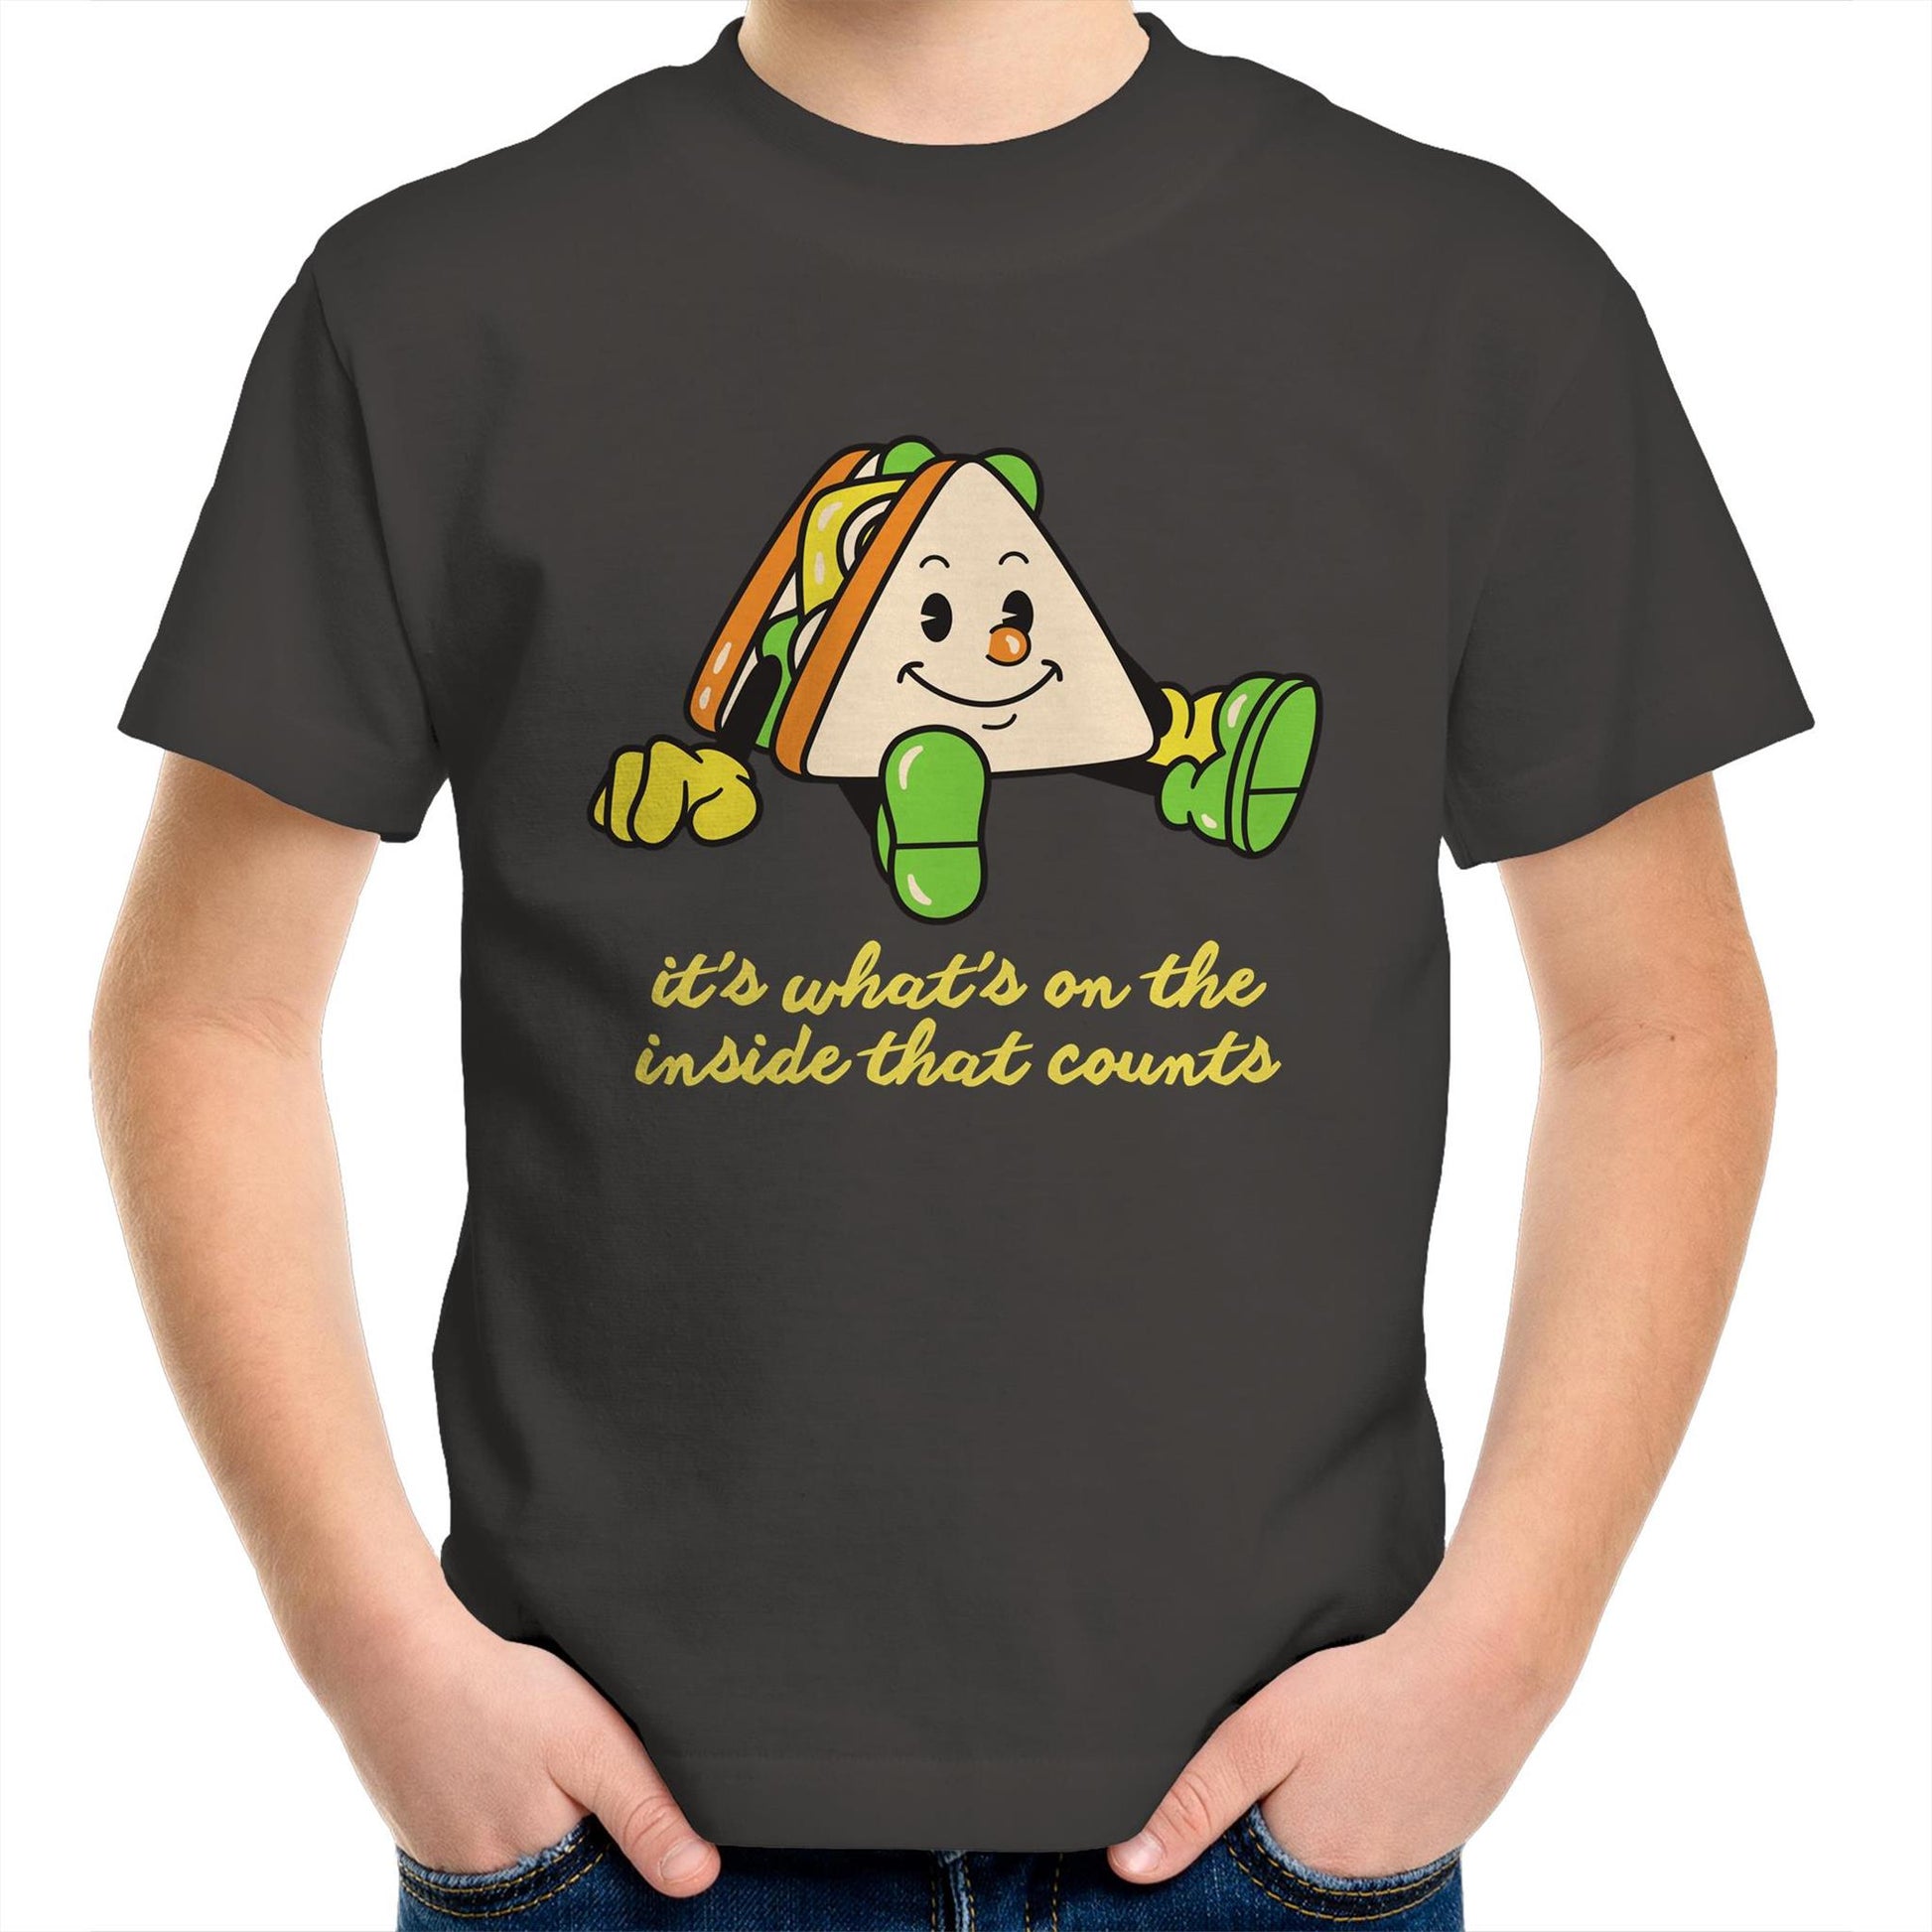 Sandwich, It's What's On The Inside That Counts - Kids Youth T-Shirt Charcoal Kids Youth T-shirt Food Motivation